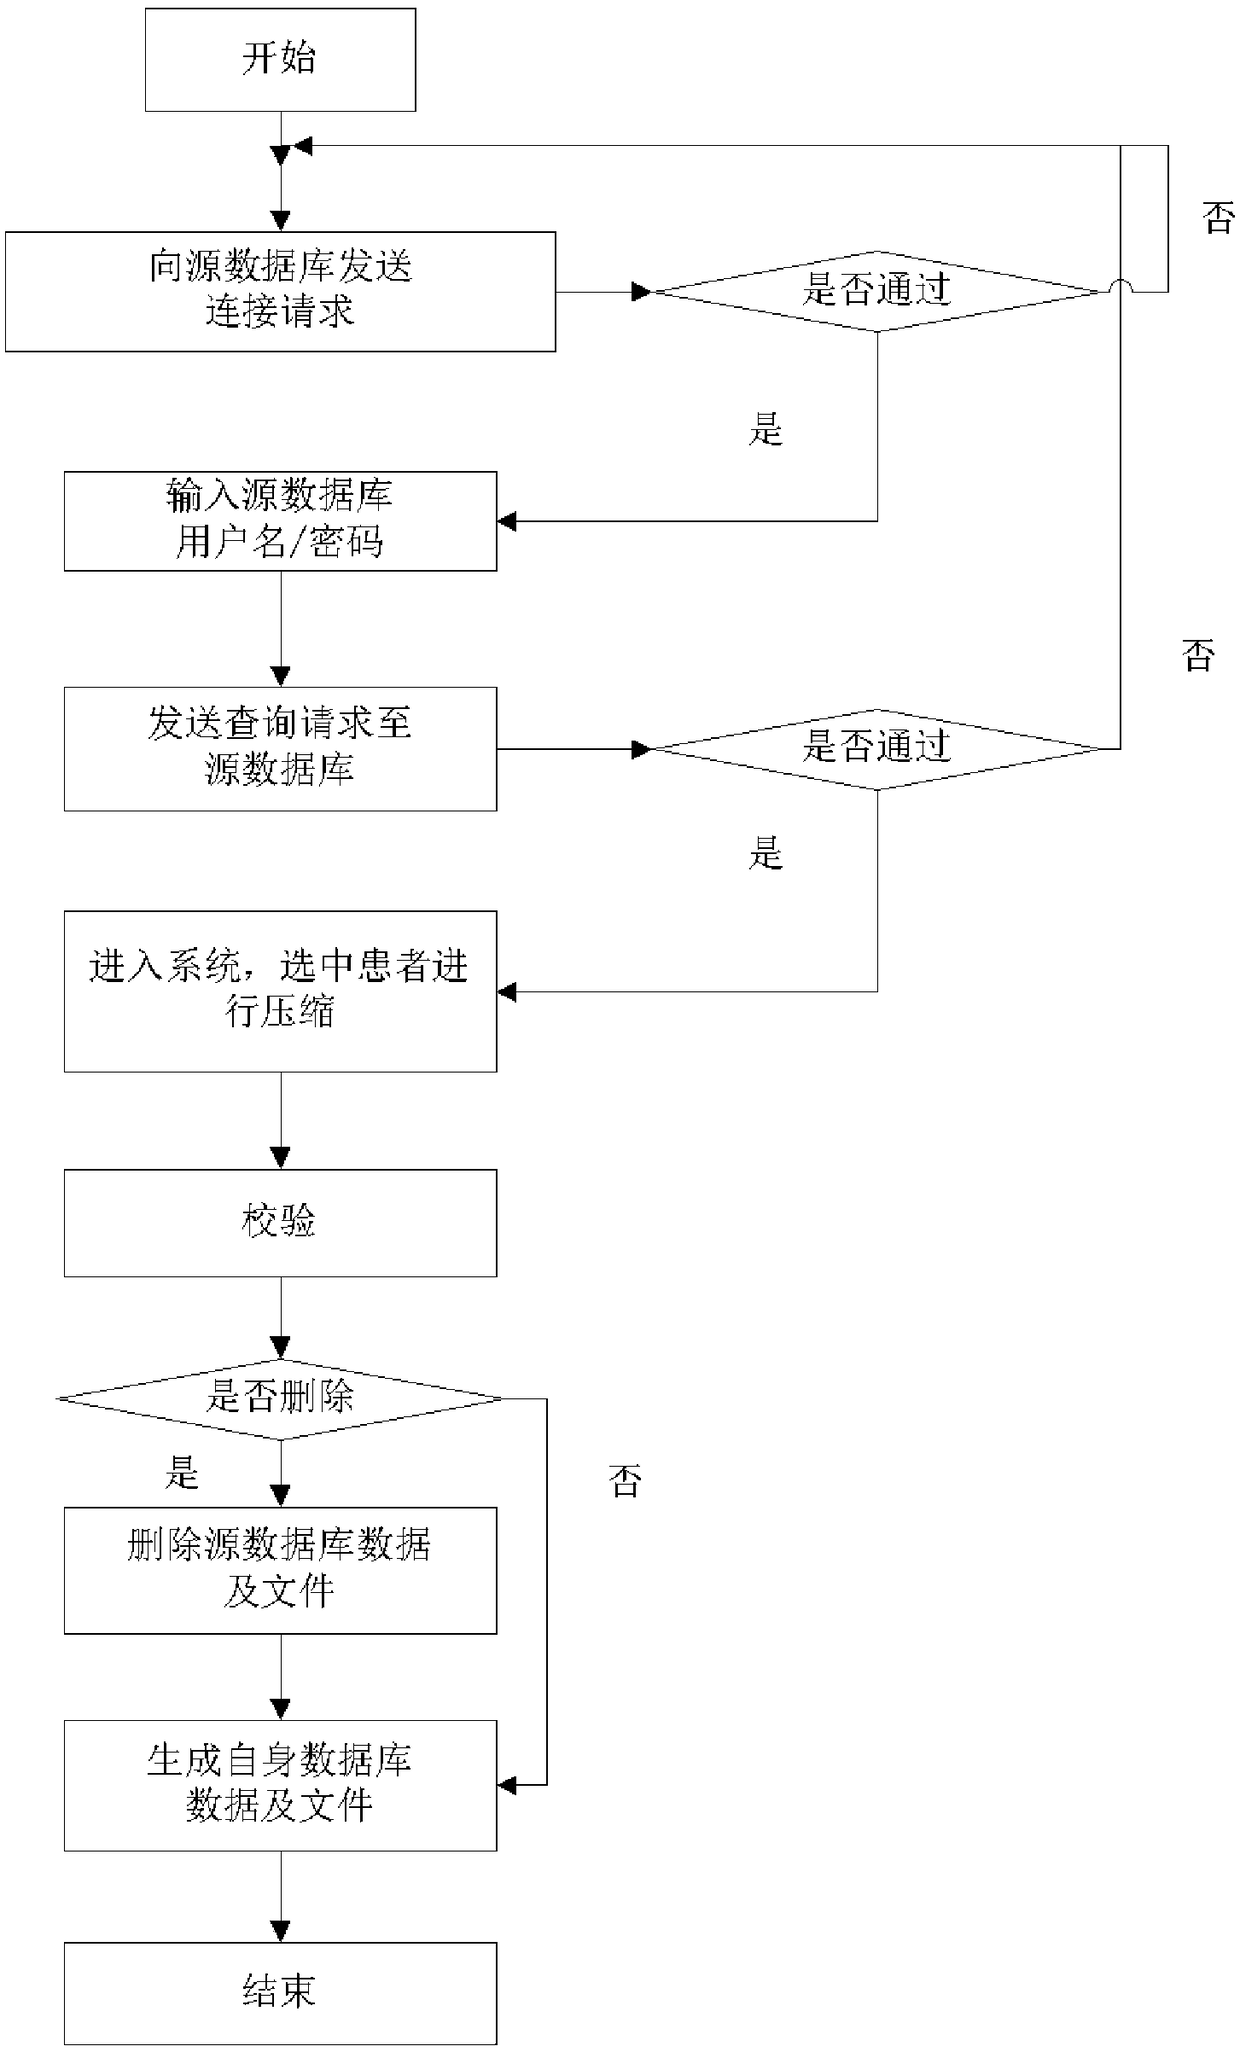 Backup method applied to a database of a radiotherapy department